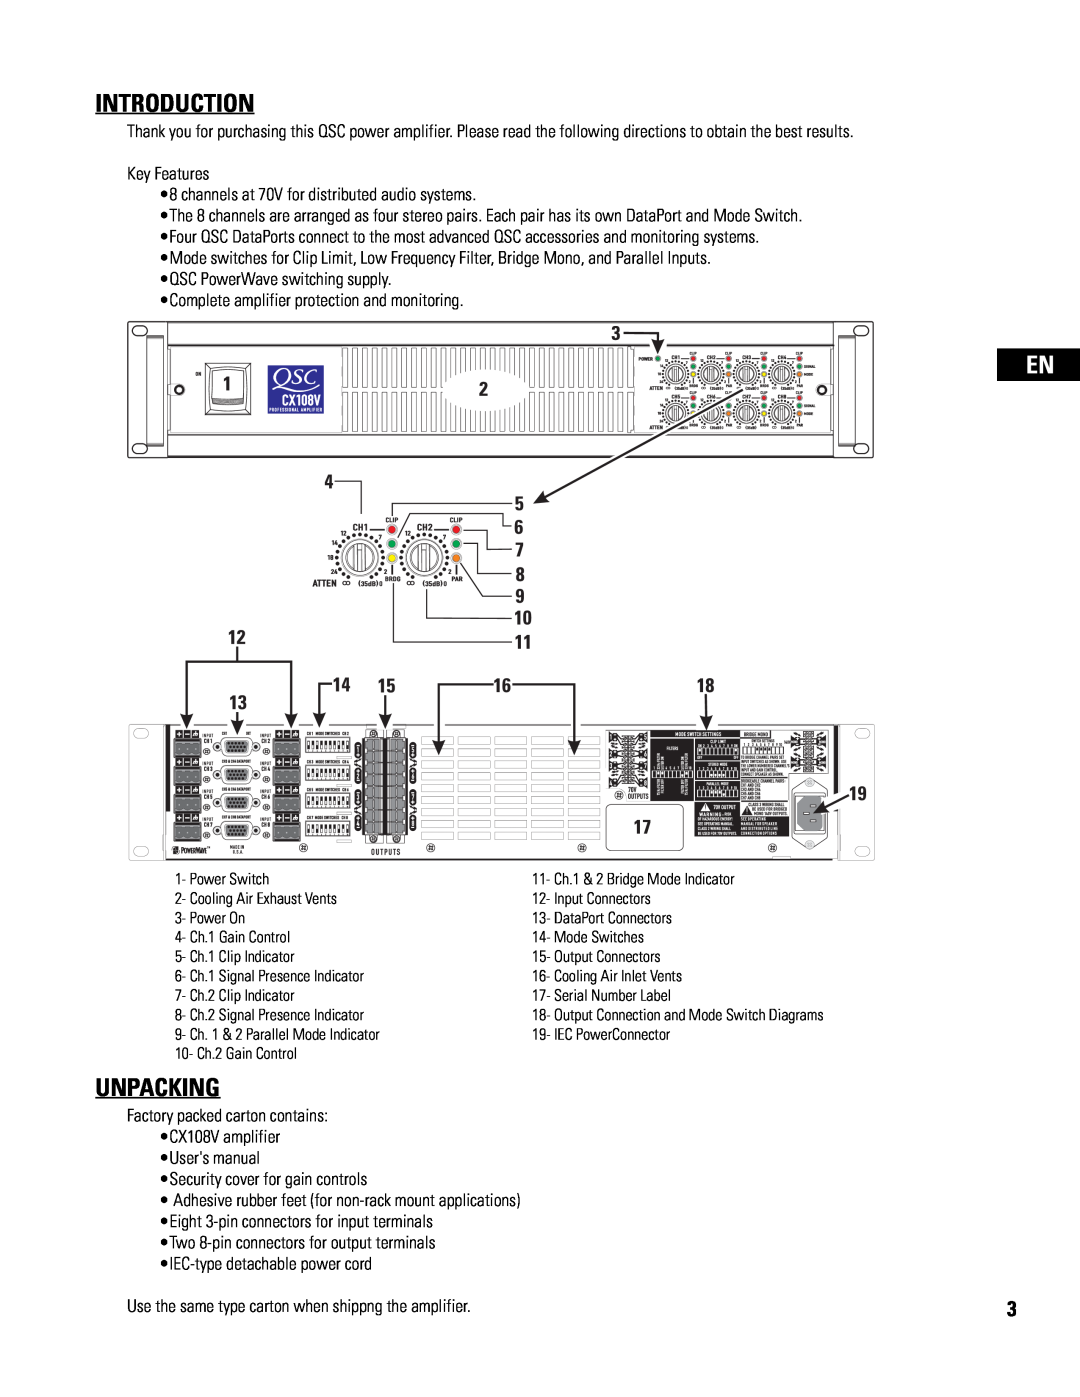 QSC Audio CX108V user manual Introduction, Unpacking, Key Features, channels at 70V for distributed audio systems 